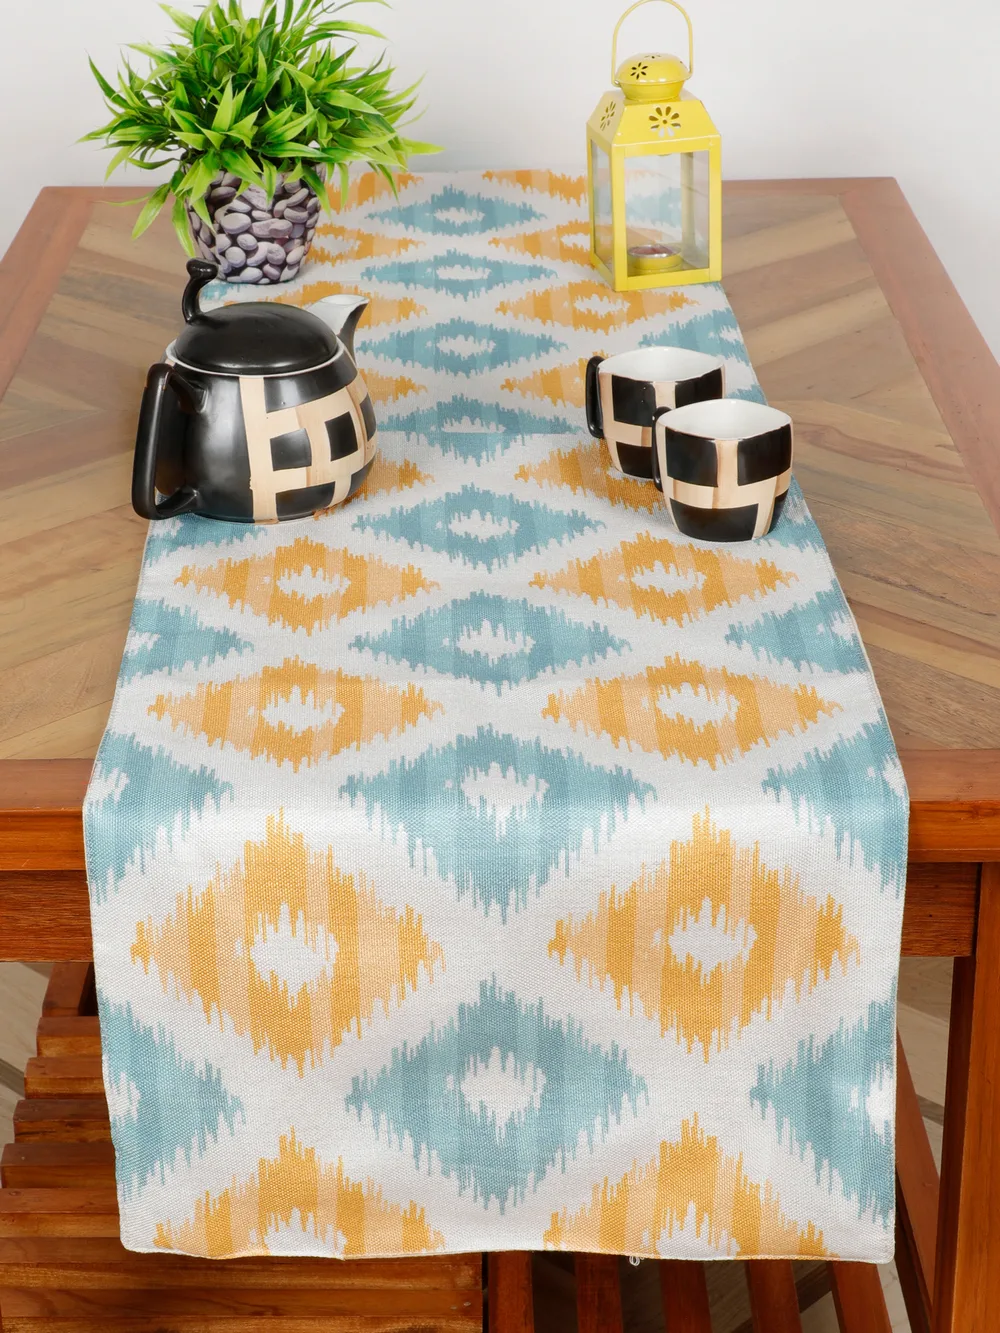 Cotton polyester printed table runner, squares, 54x14,  blue, brown